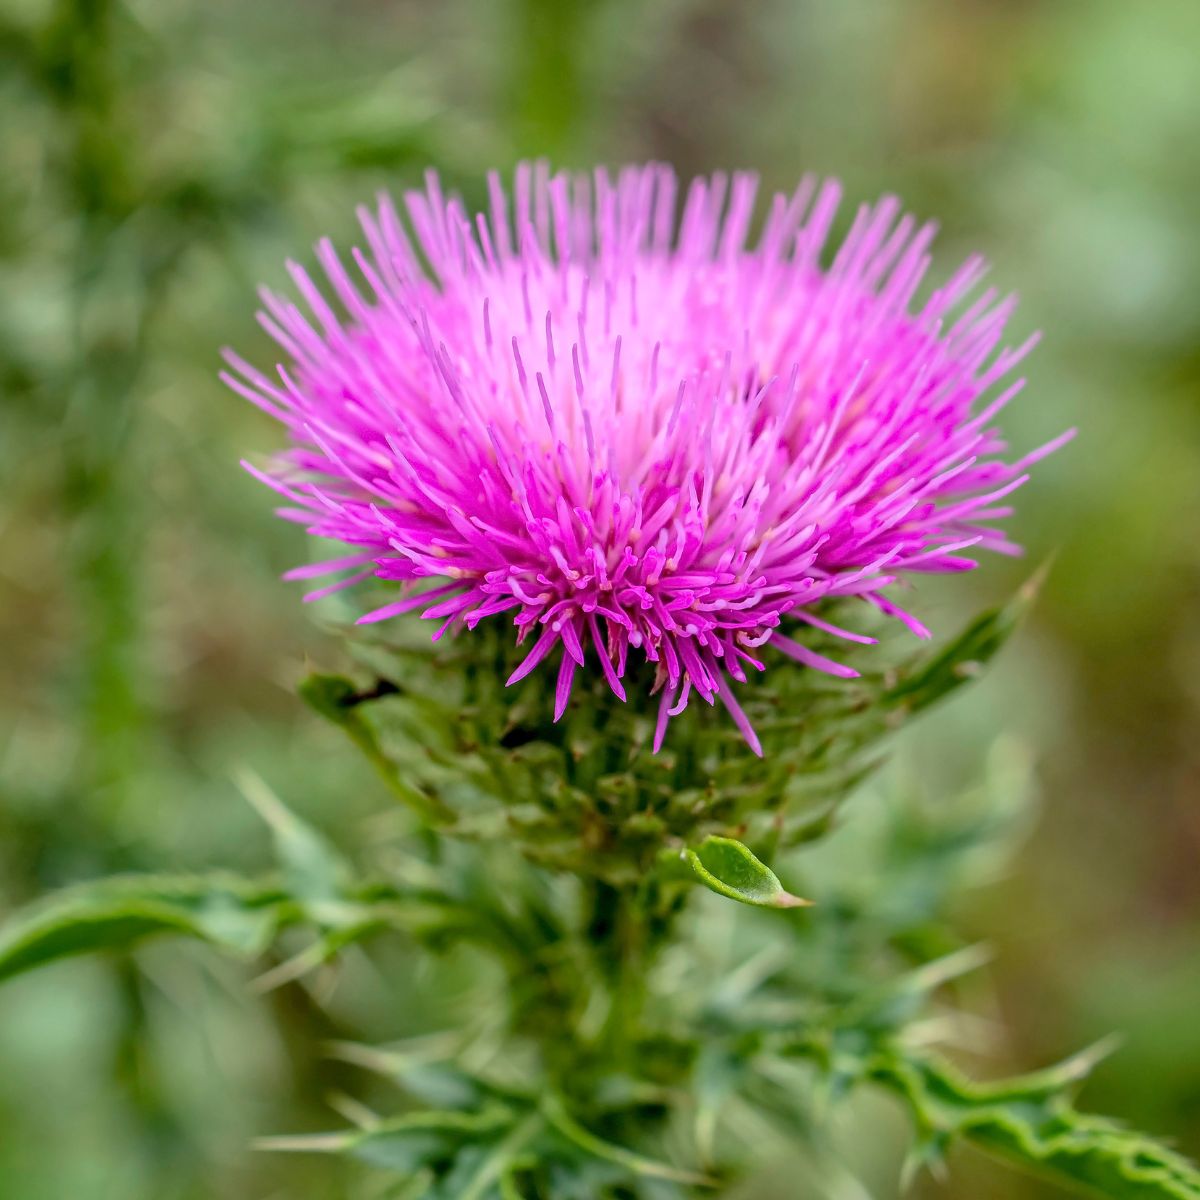 Bright pink musk thistle flower.